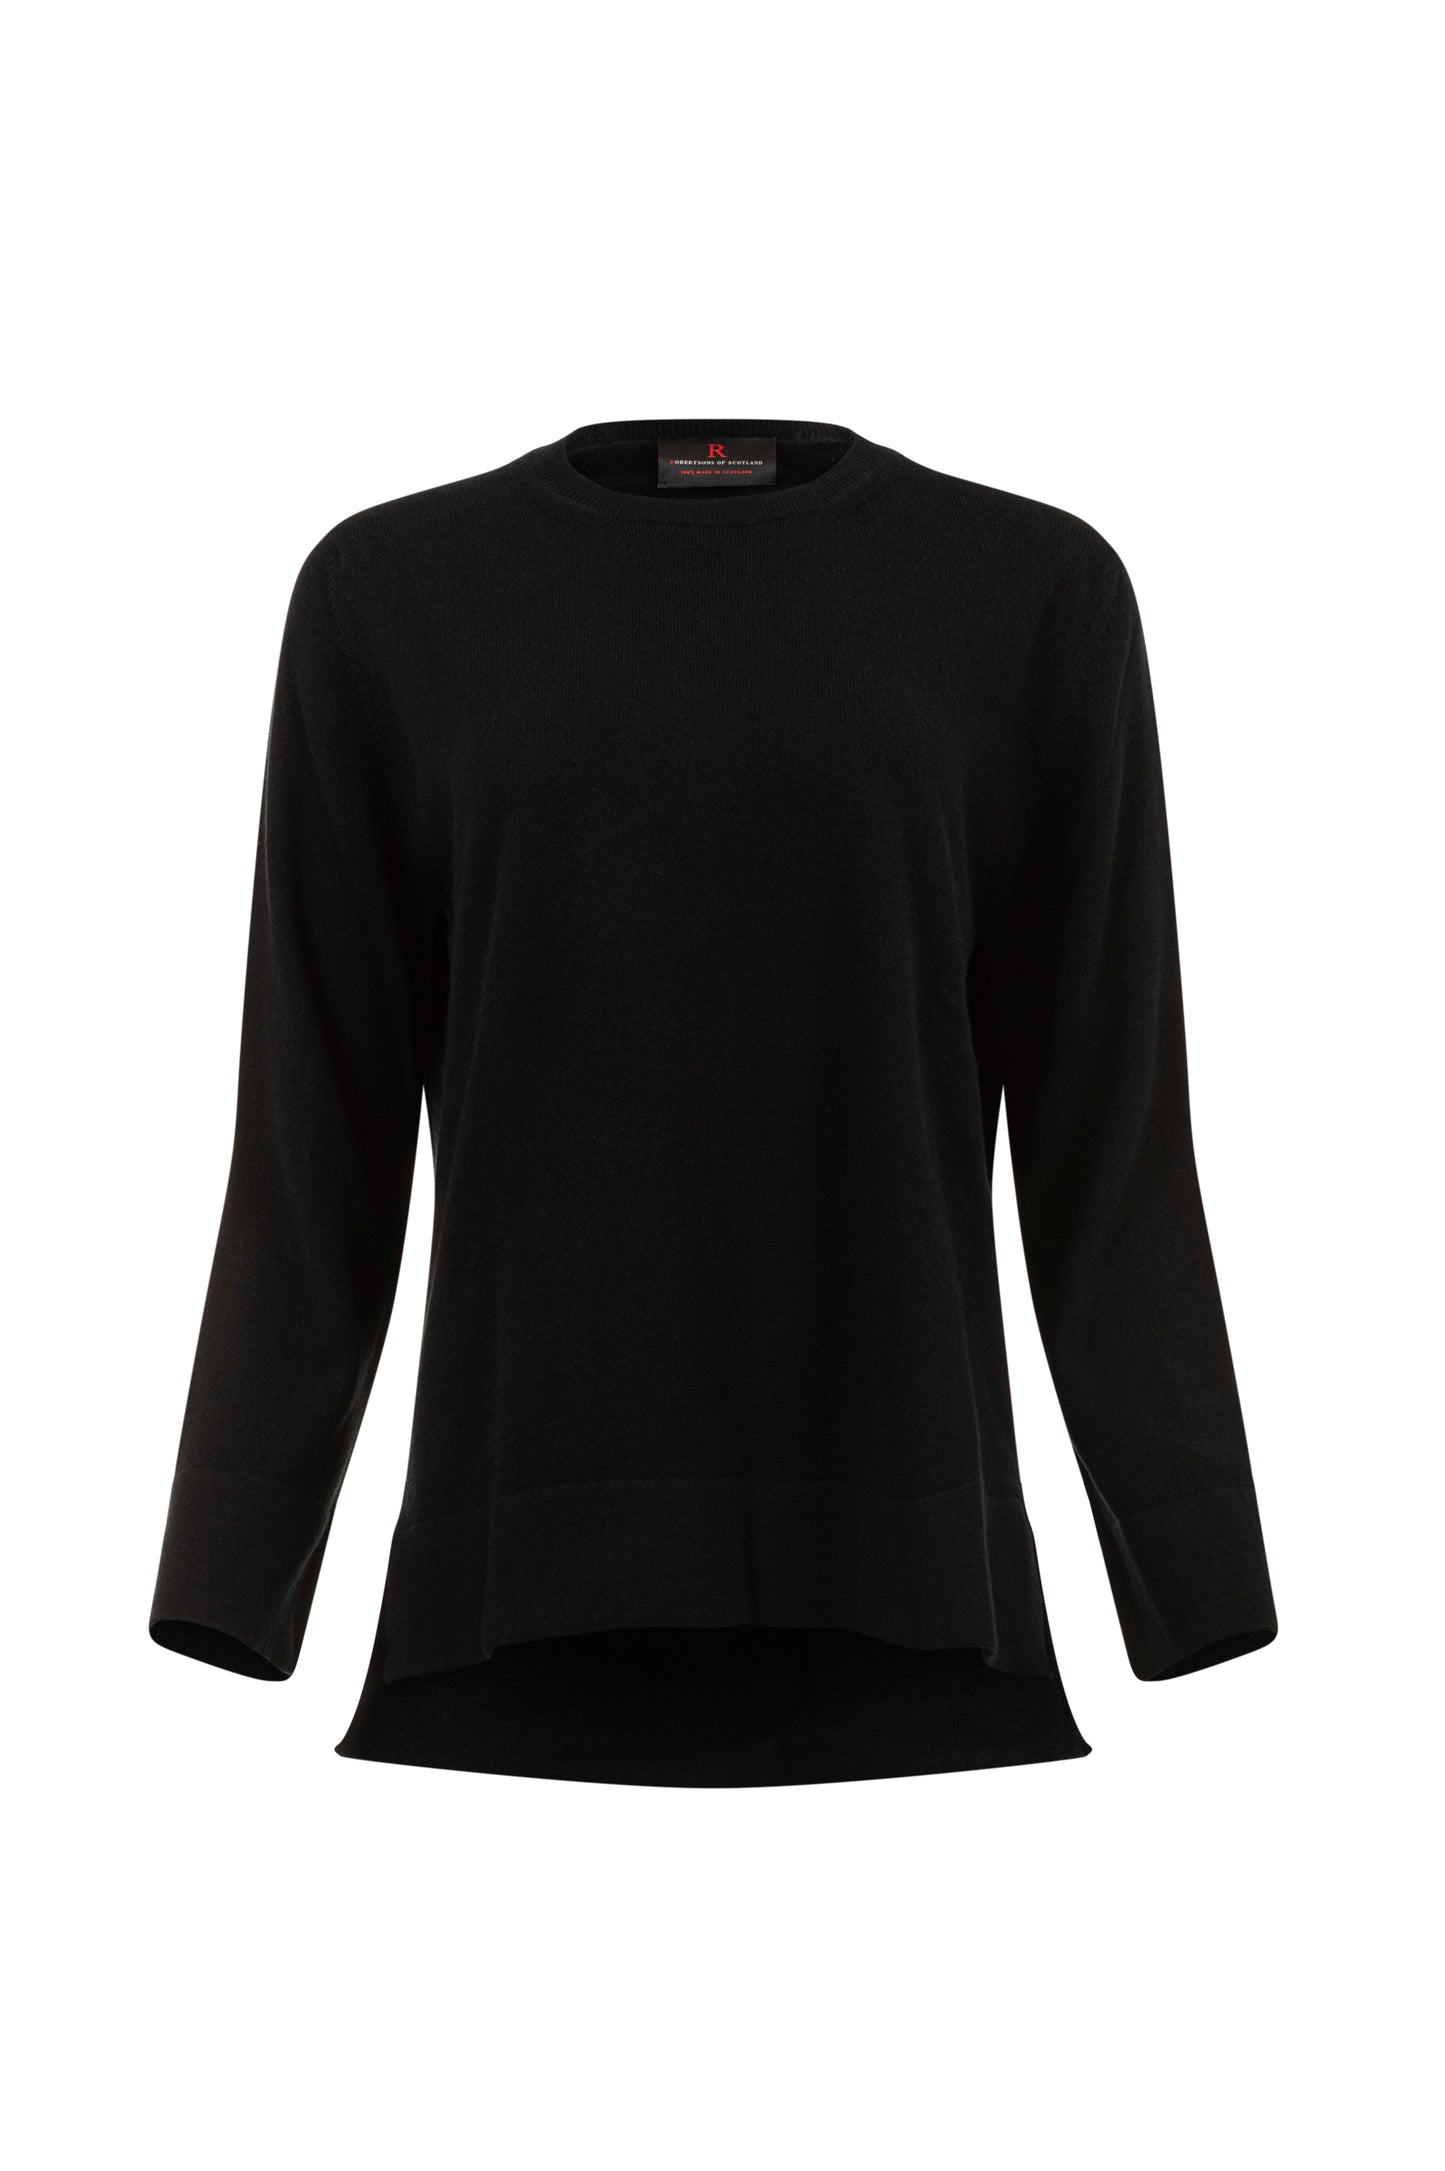 Women's Relax Fit Cashmere Jumper